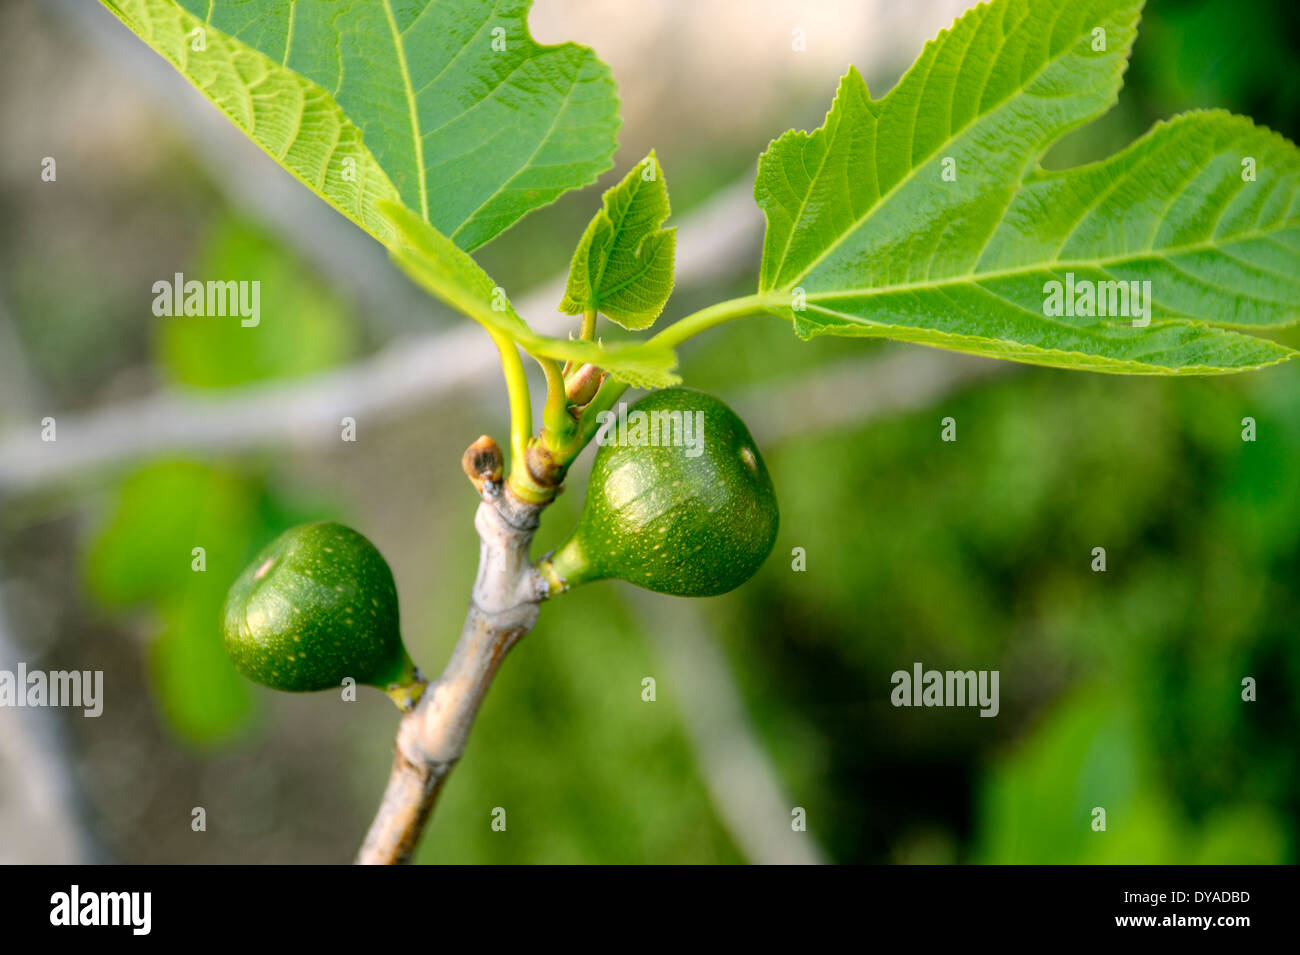 TWO FIGS GROWING ON A FIG TREE IN ITALY Stock Photo